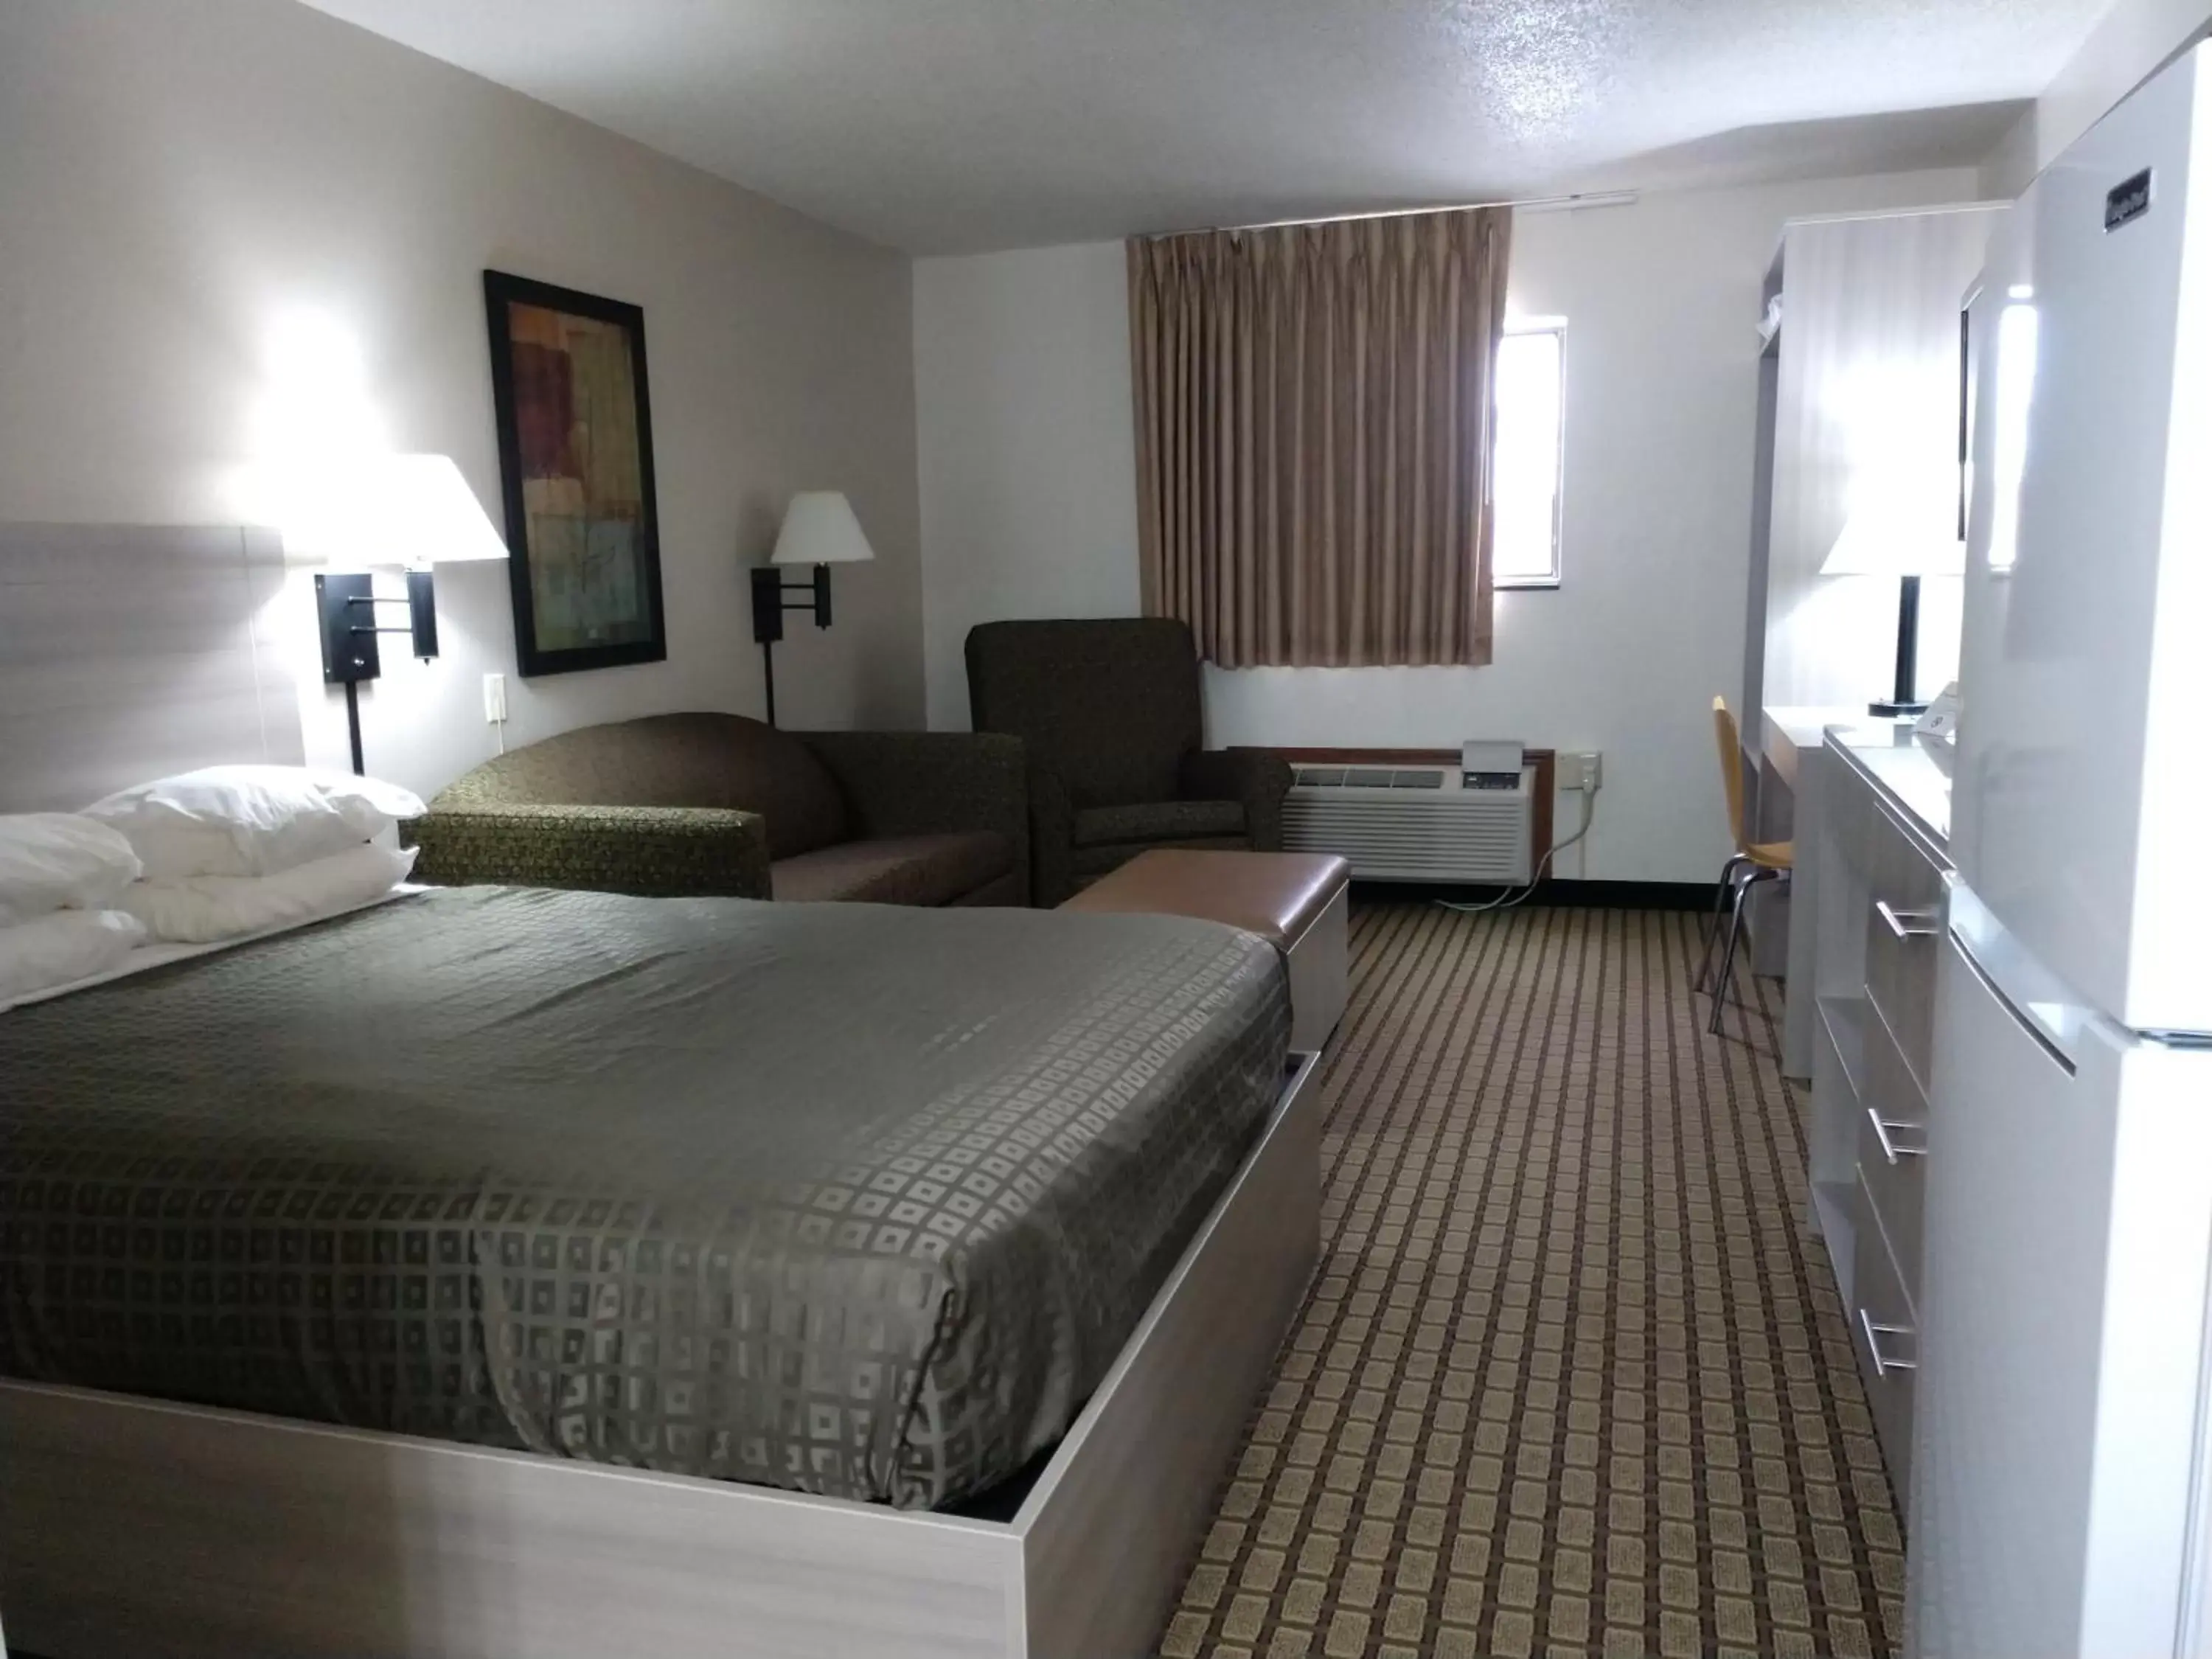 Bed in Bearcat Inn and Suites